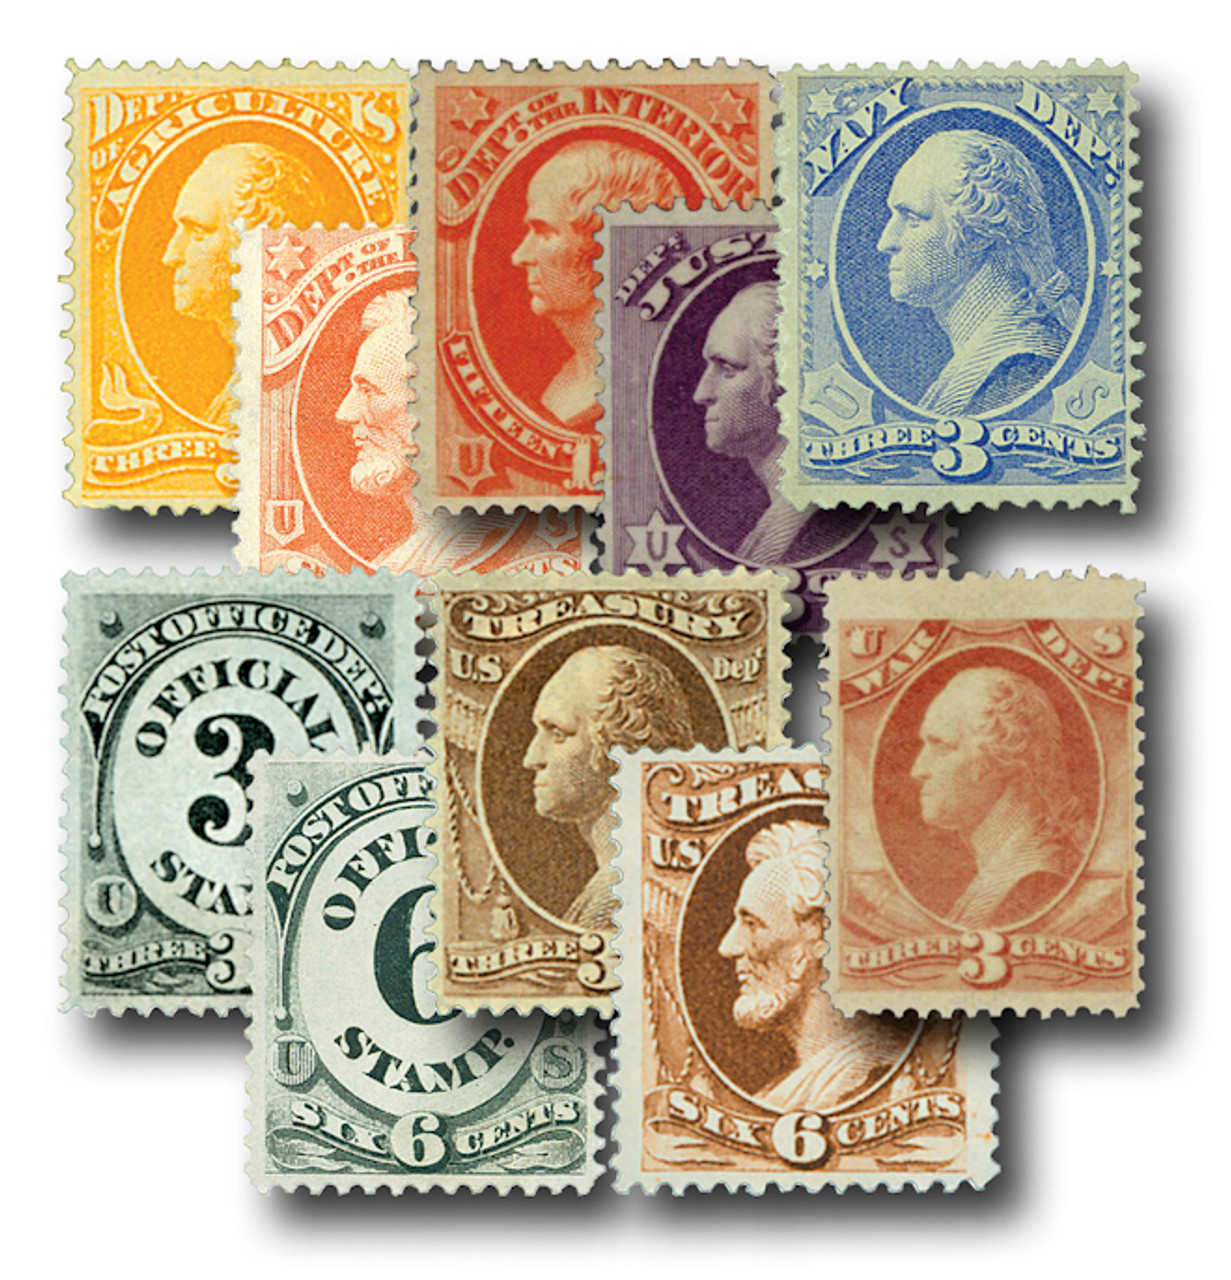 2198-2201 - 1986 22c Stamp Collecting - Mystic Stamp Company